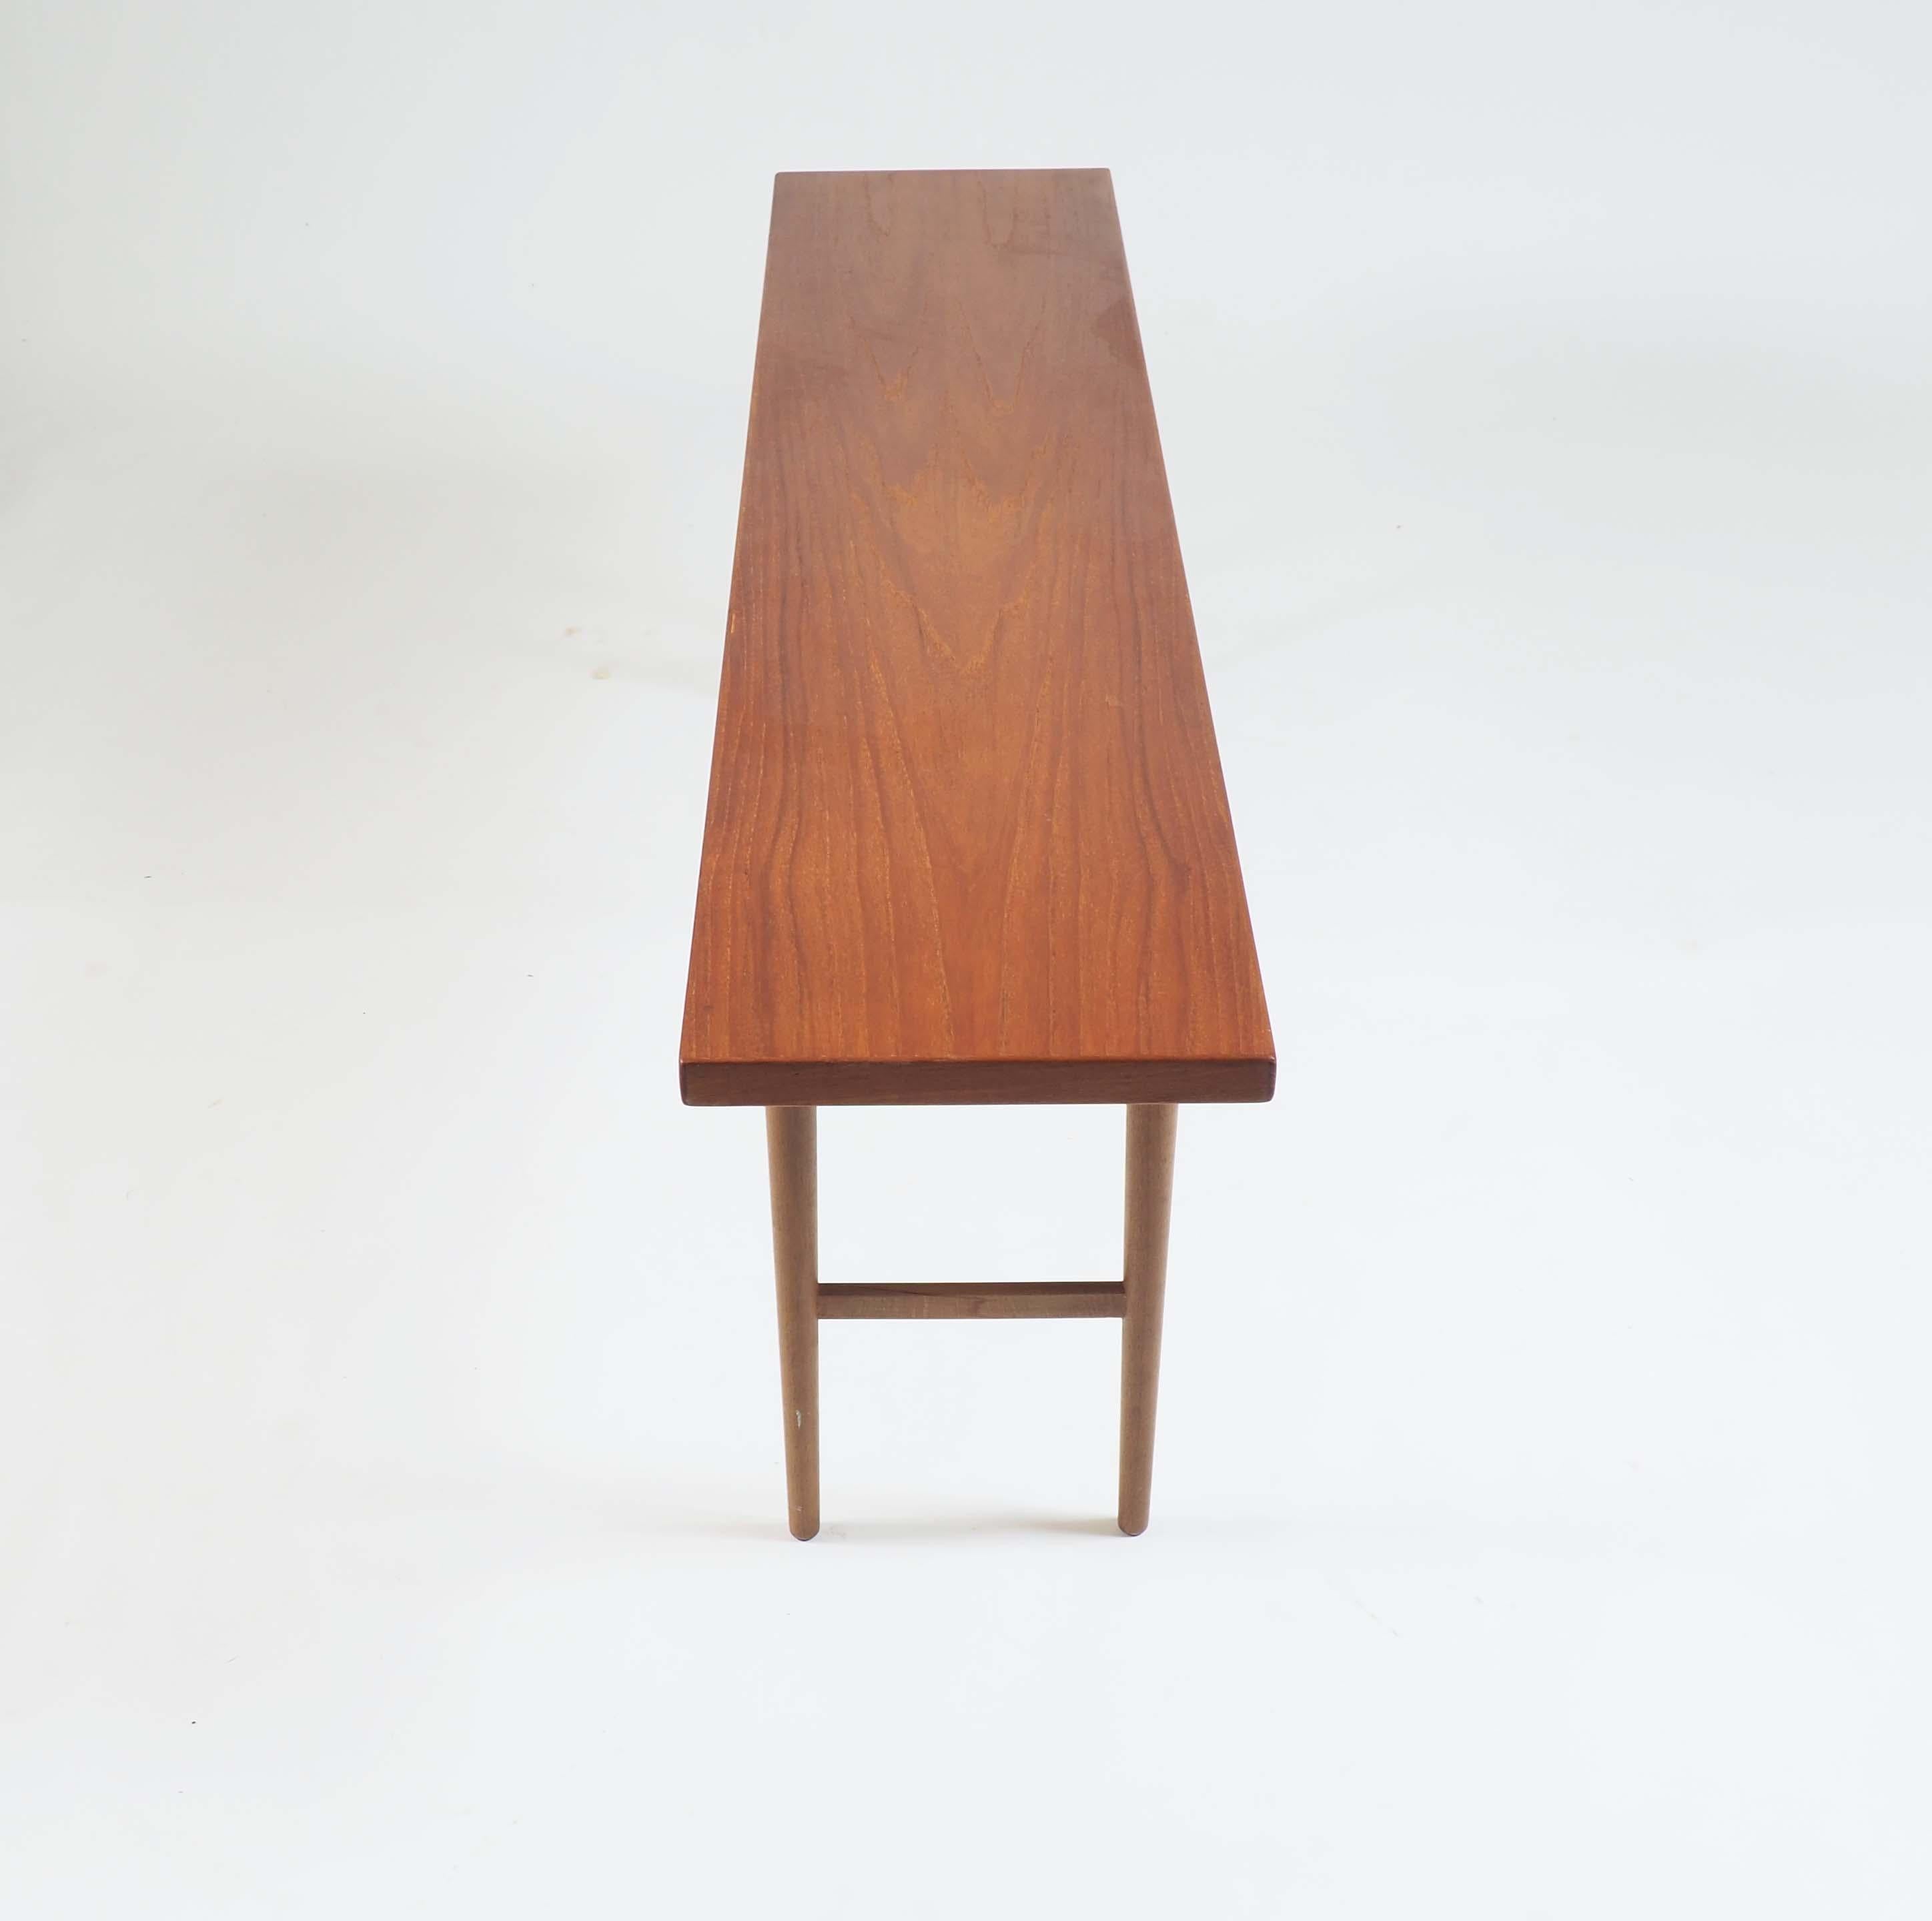 These nesting tables were designed by Kurt Østervig in 1956 and produced by Jason Møbler in Ringsted, Denmark. The model is called model 200 and they are made of teak with legs in beechwood.
They can be used in many ways. As a sideboard, as side